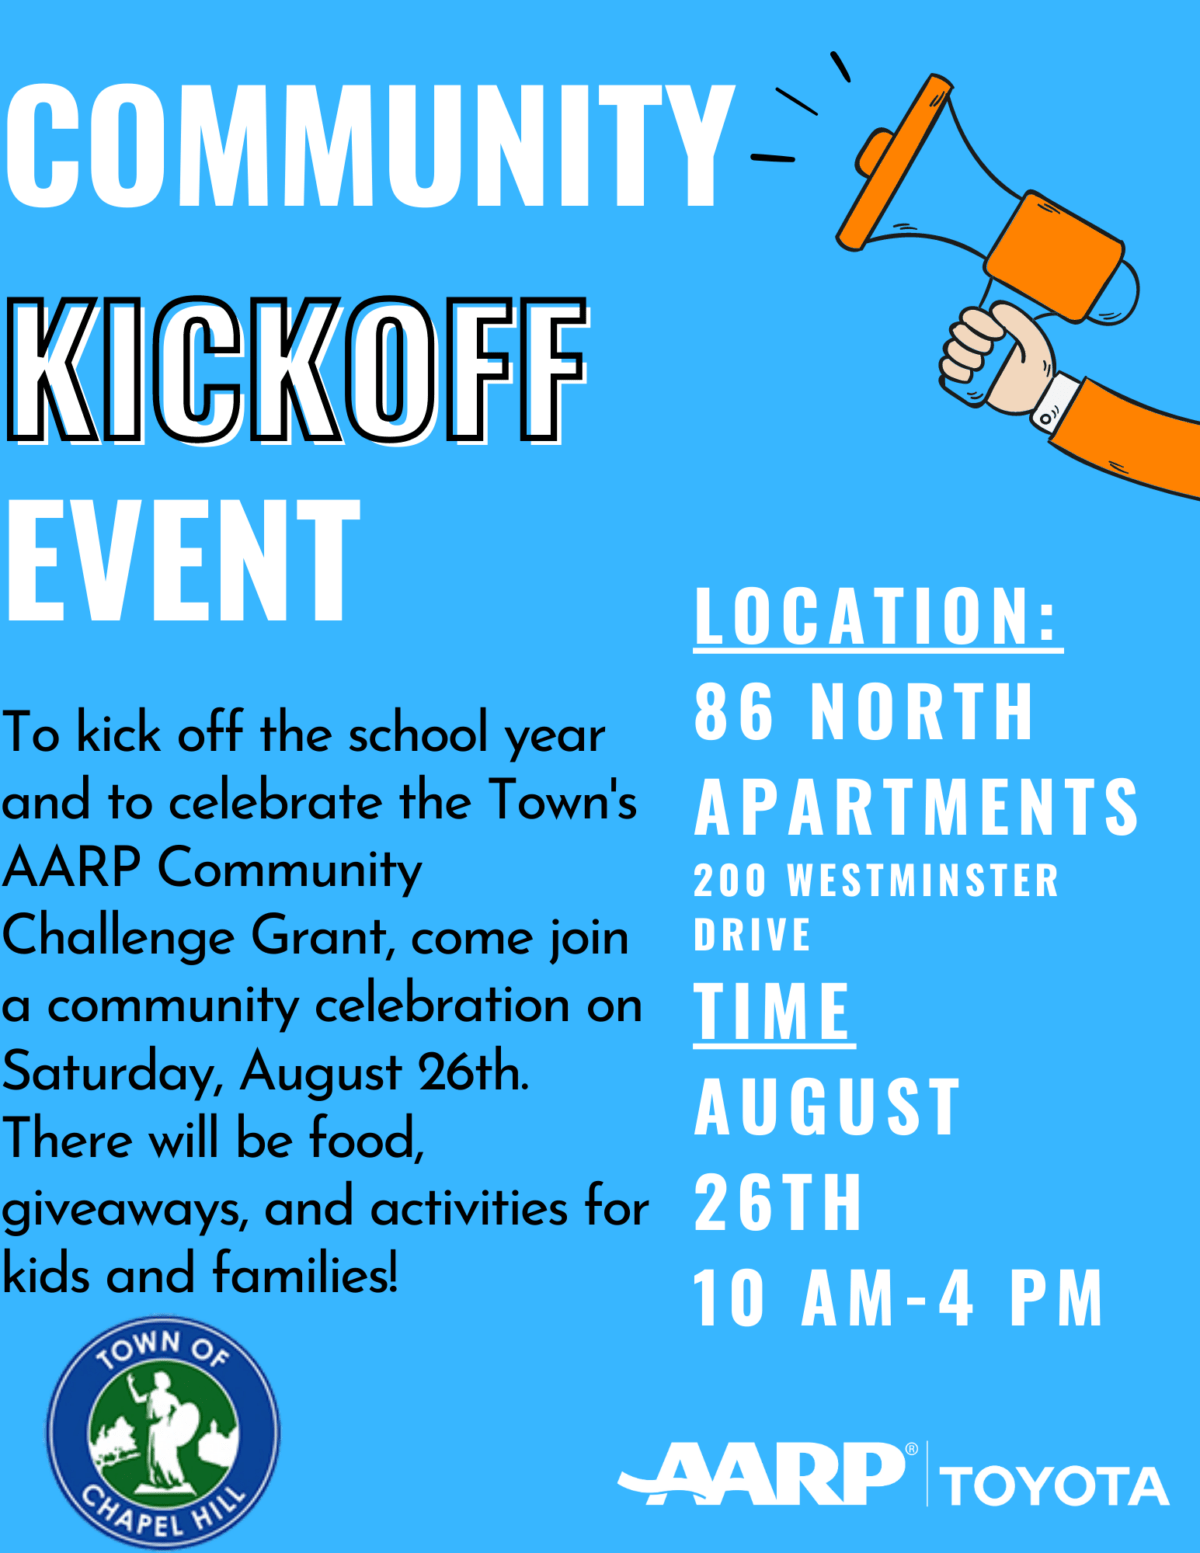 A poster for the Town of Chapel Hills Community Kickoff Even on 8/26 at 86 North Apartments